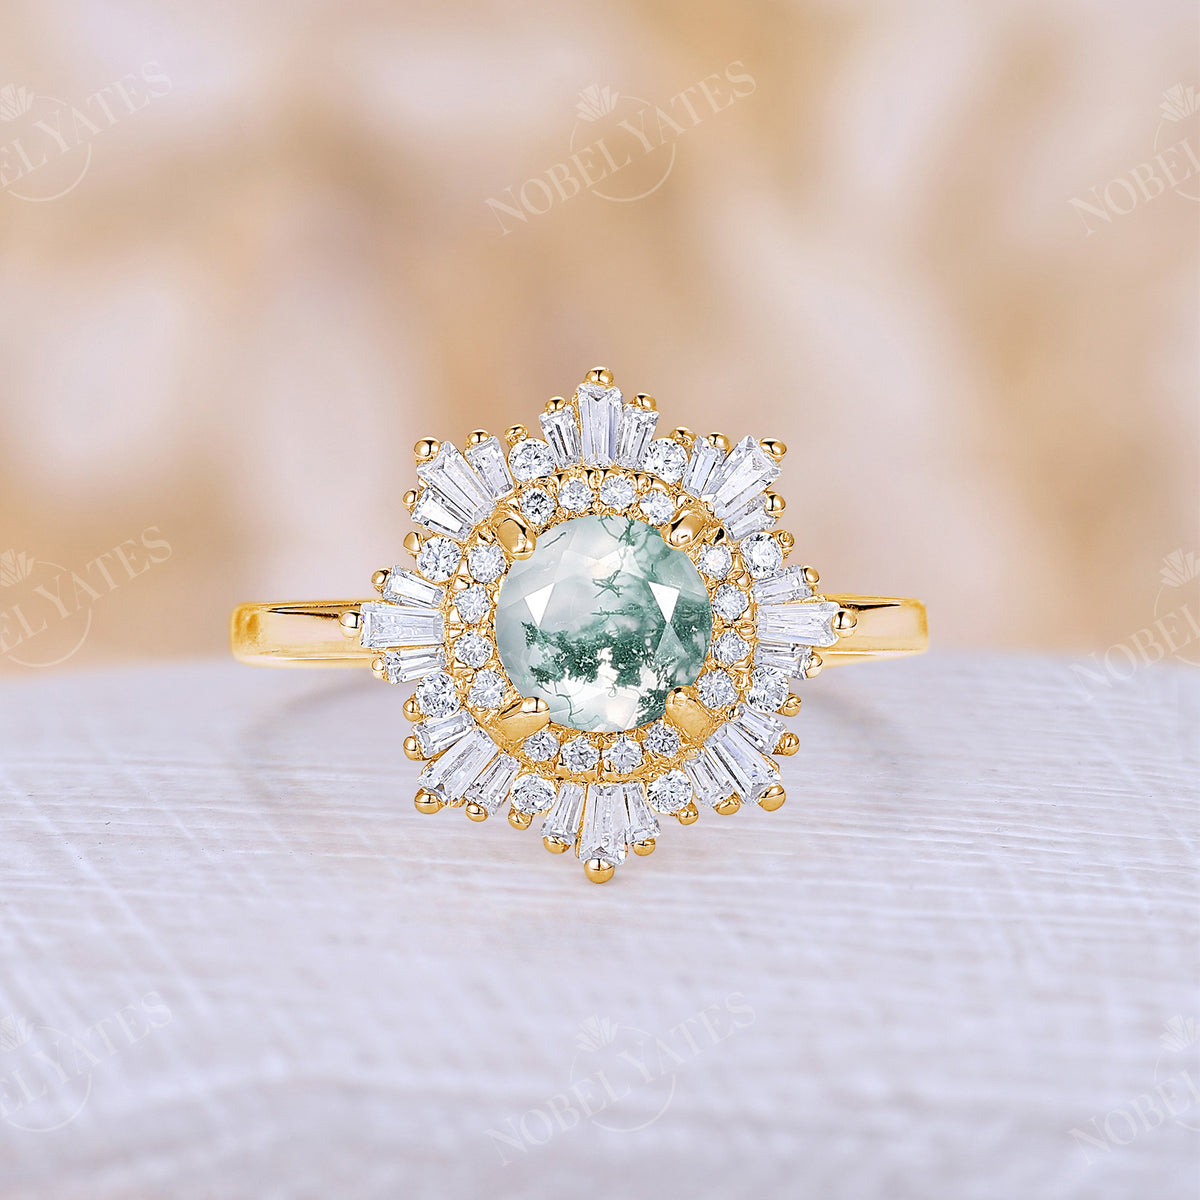 Moss Agate Art Deco Round Halo Engagement Ring White Gold